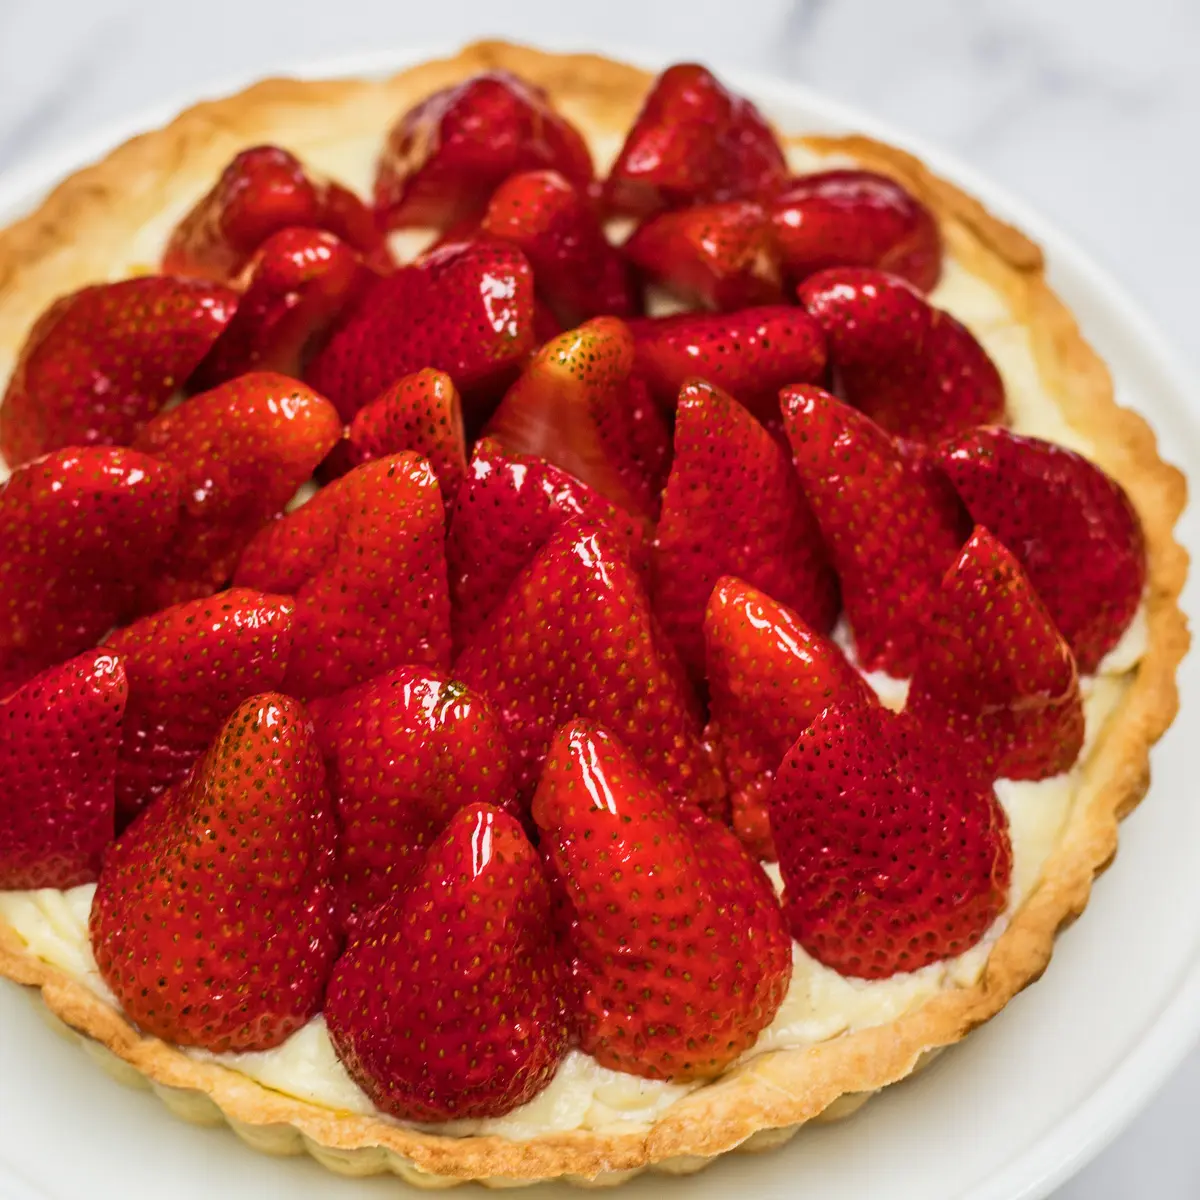 Tarte aux Fraises the classic French strawberry tart shown on white cake stand.